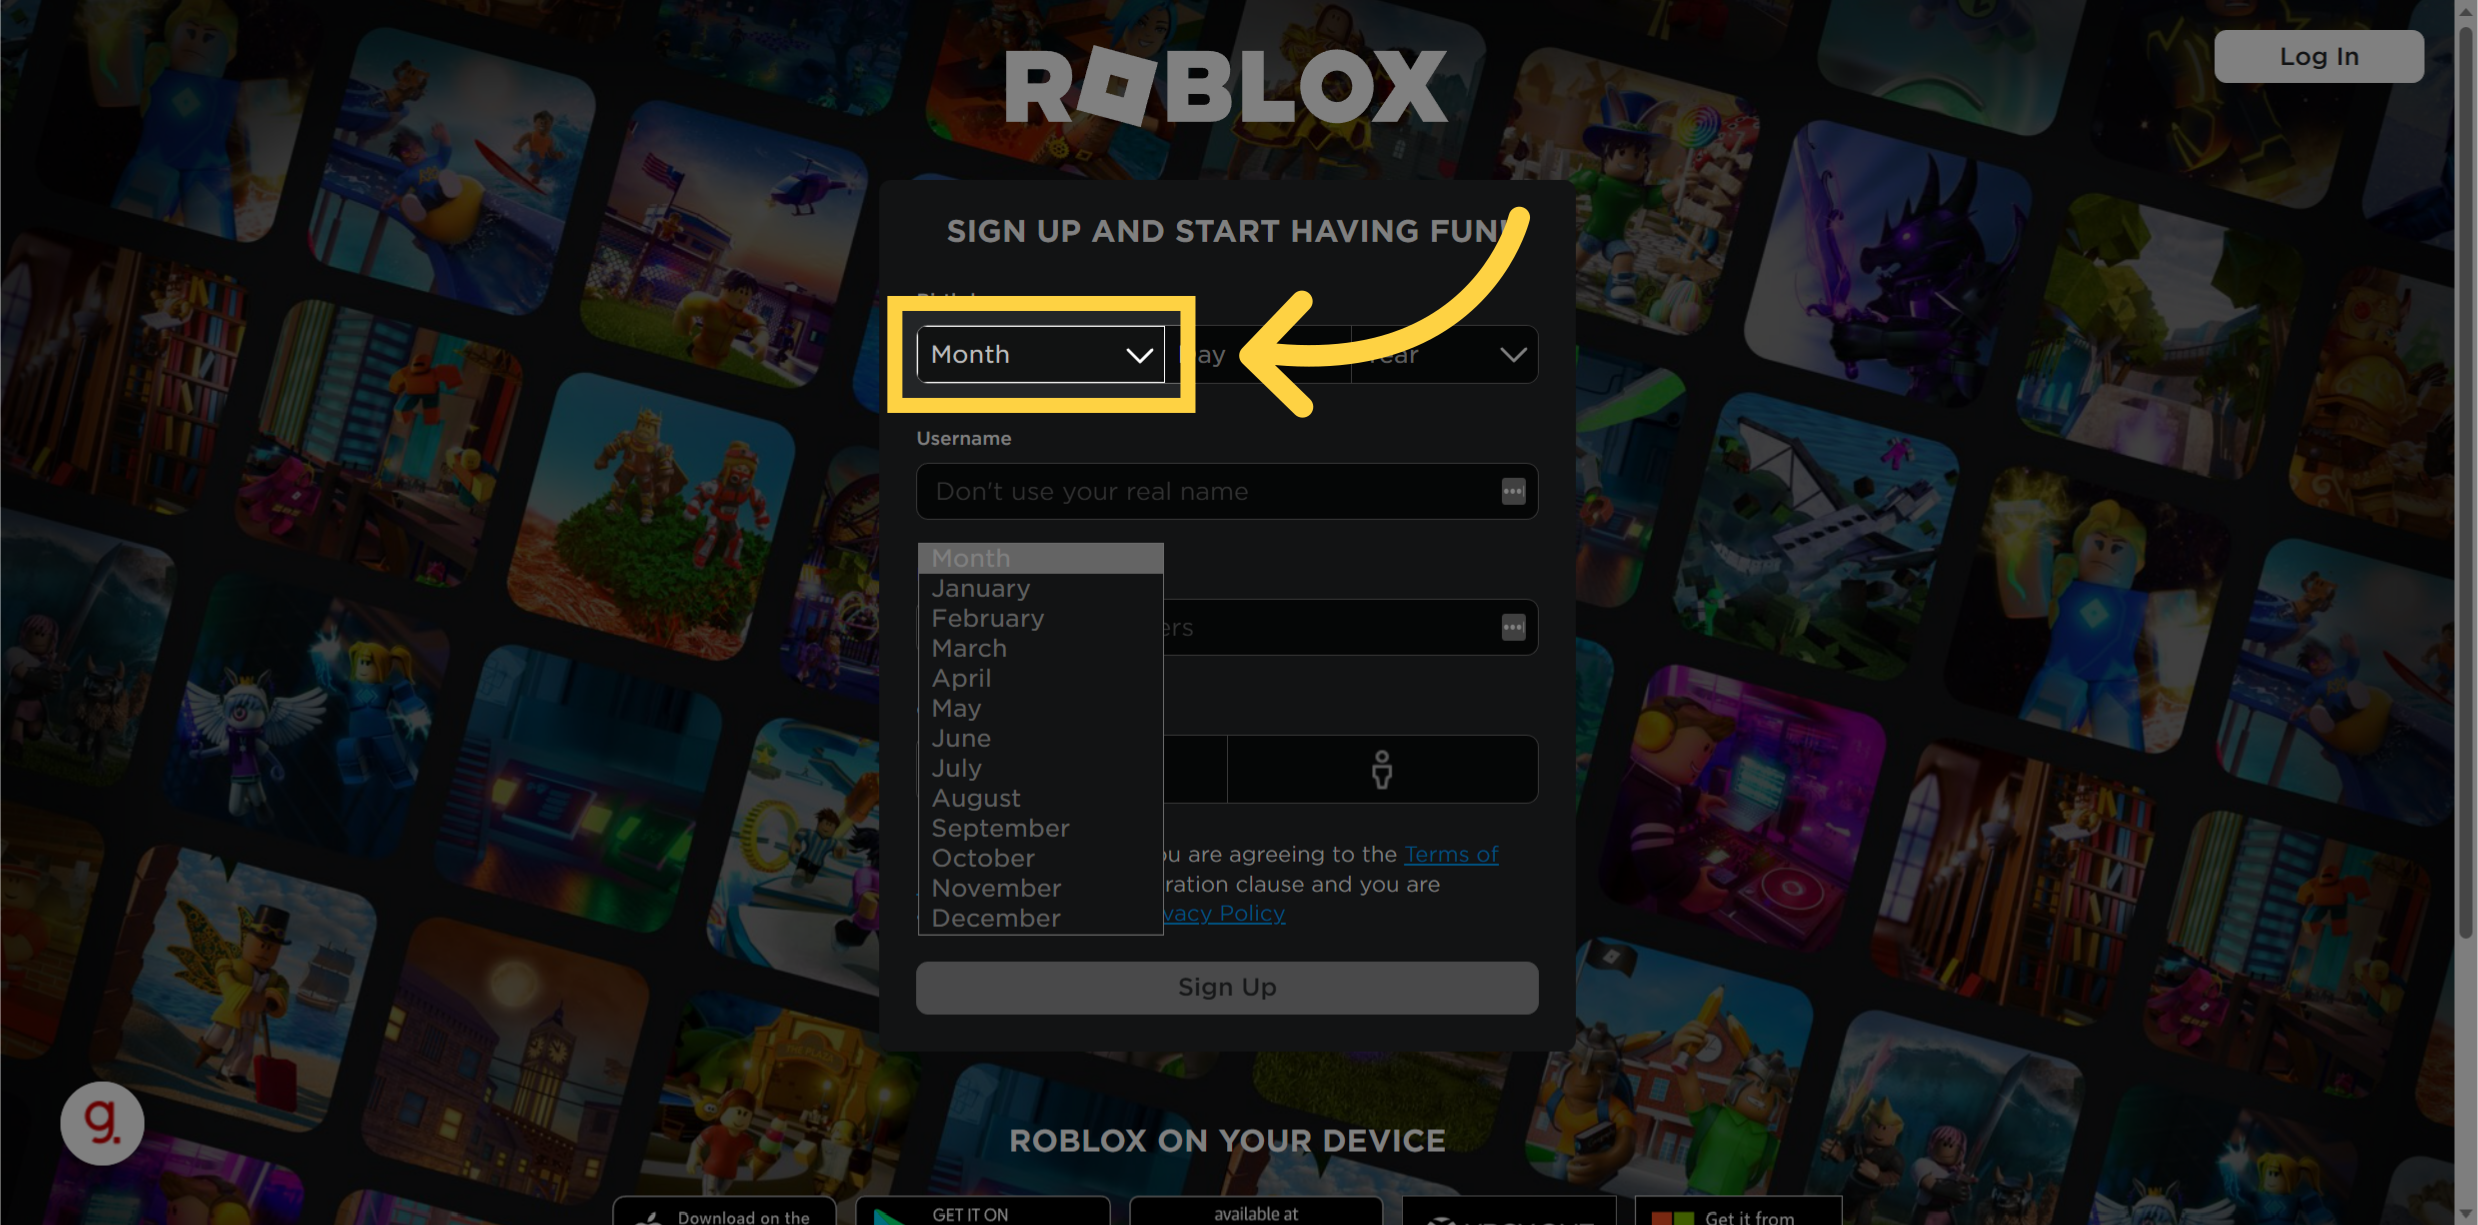 Instructions on How to login to roblox?